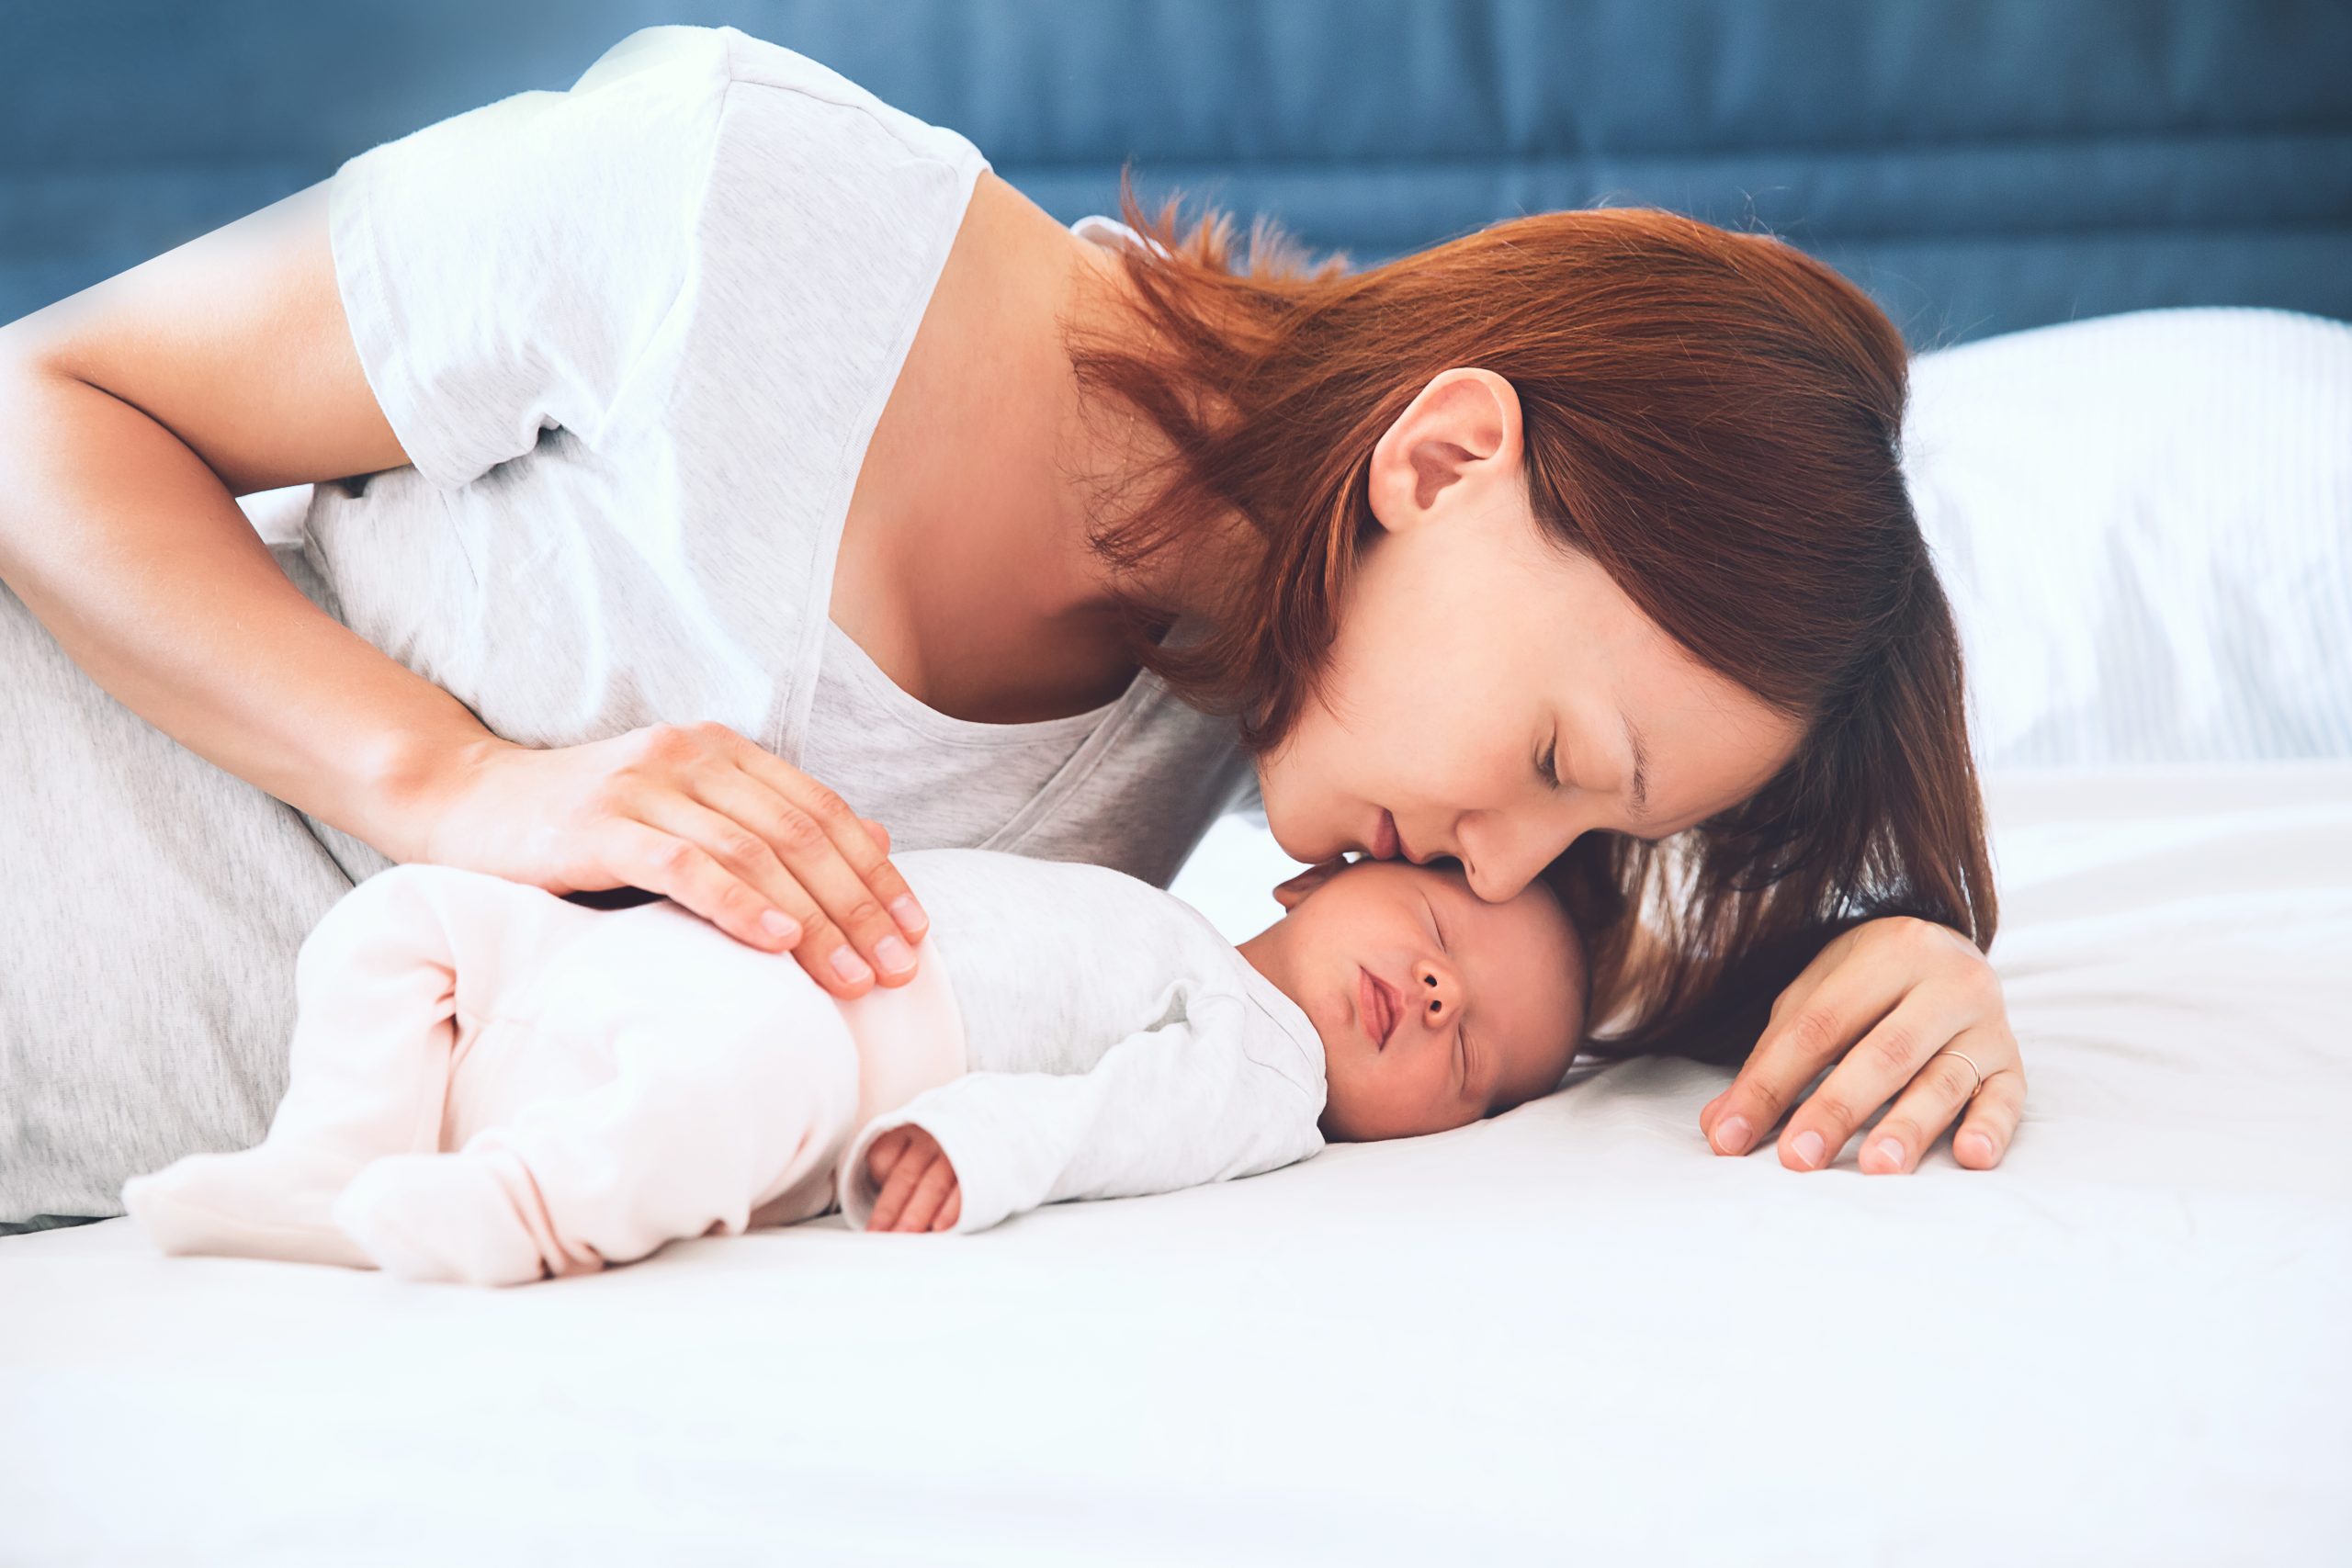 Mother kissing her newborn baby. Young beautiful mom lying at bed with a cute little sleeping child. New born baby's first days of life in family at home. Loving mother looks at asleep infant.